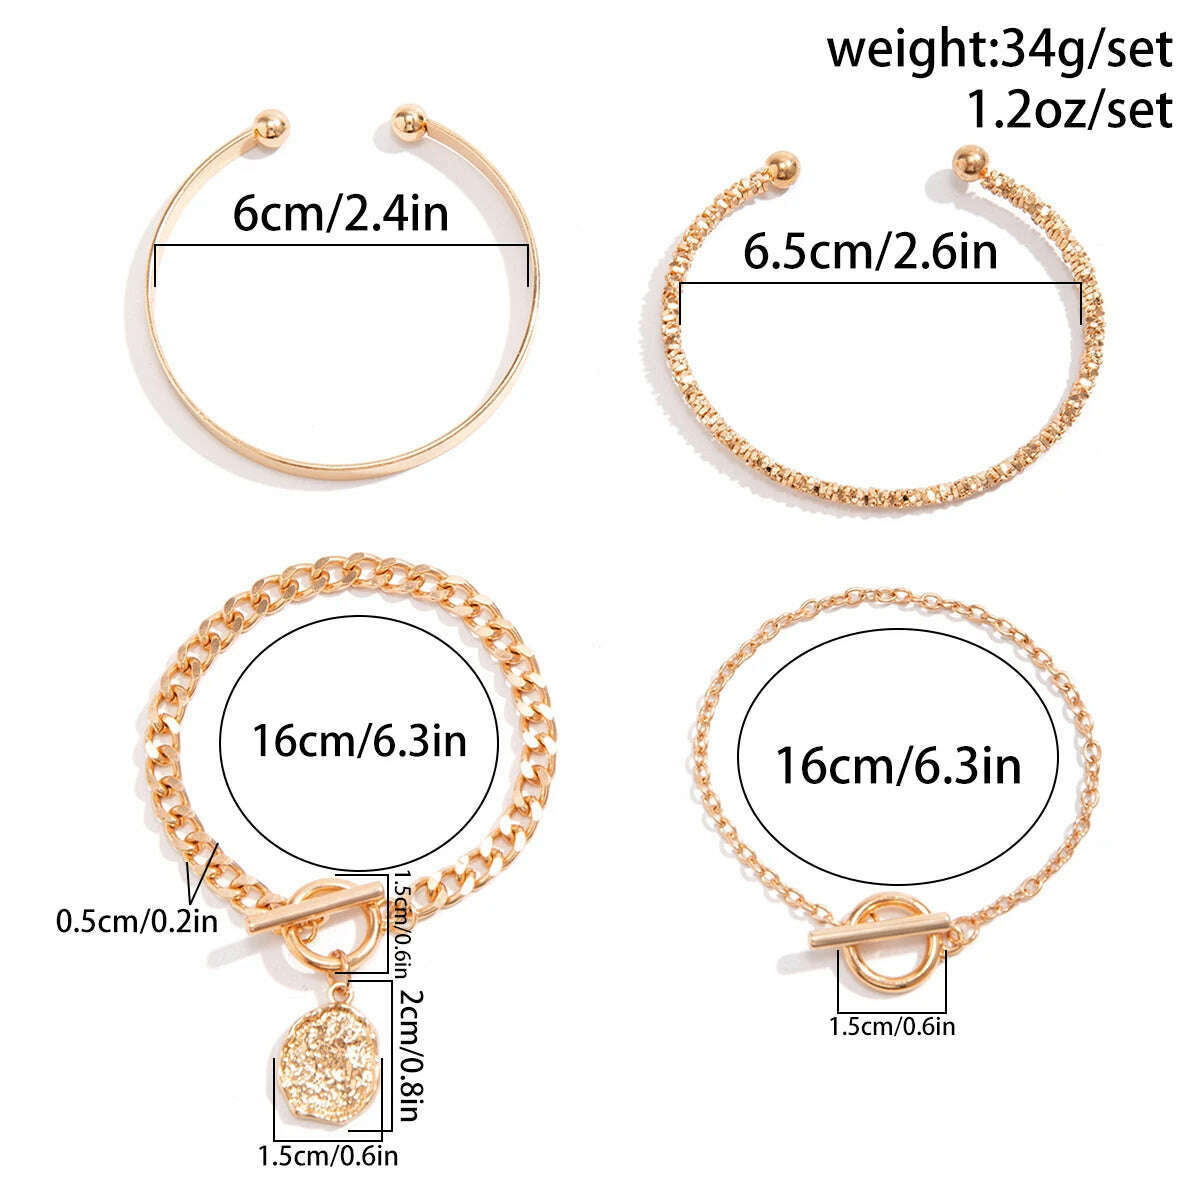 KIMLUD, Ingemark 4Pcs/Set Vintage OT Buckle Coin Pendant Bracelet for Women on Hand Goth Open Charm Bangles Couple Friends Jewelry Gift, KIMLUD Women's Clothes